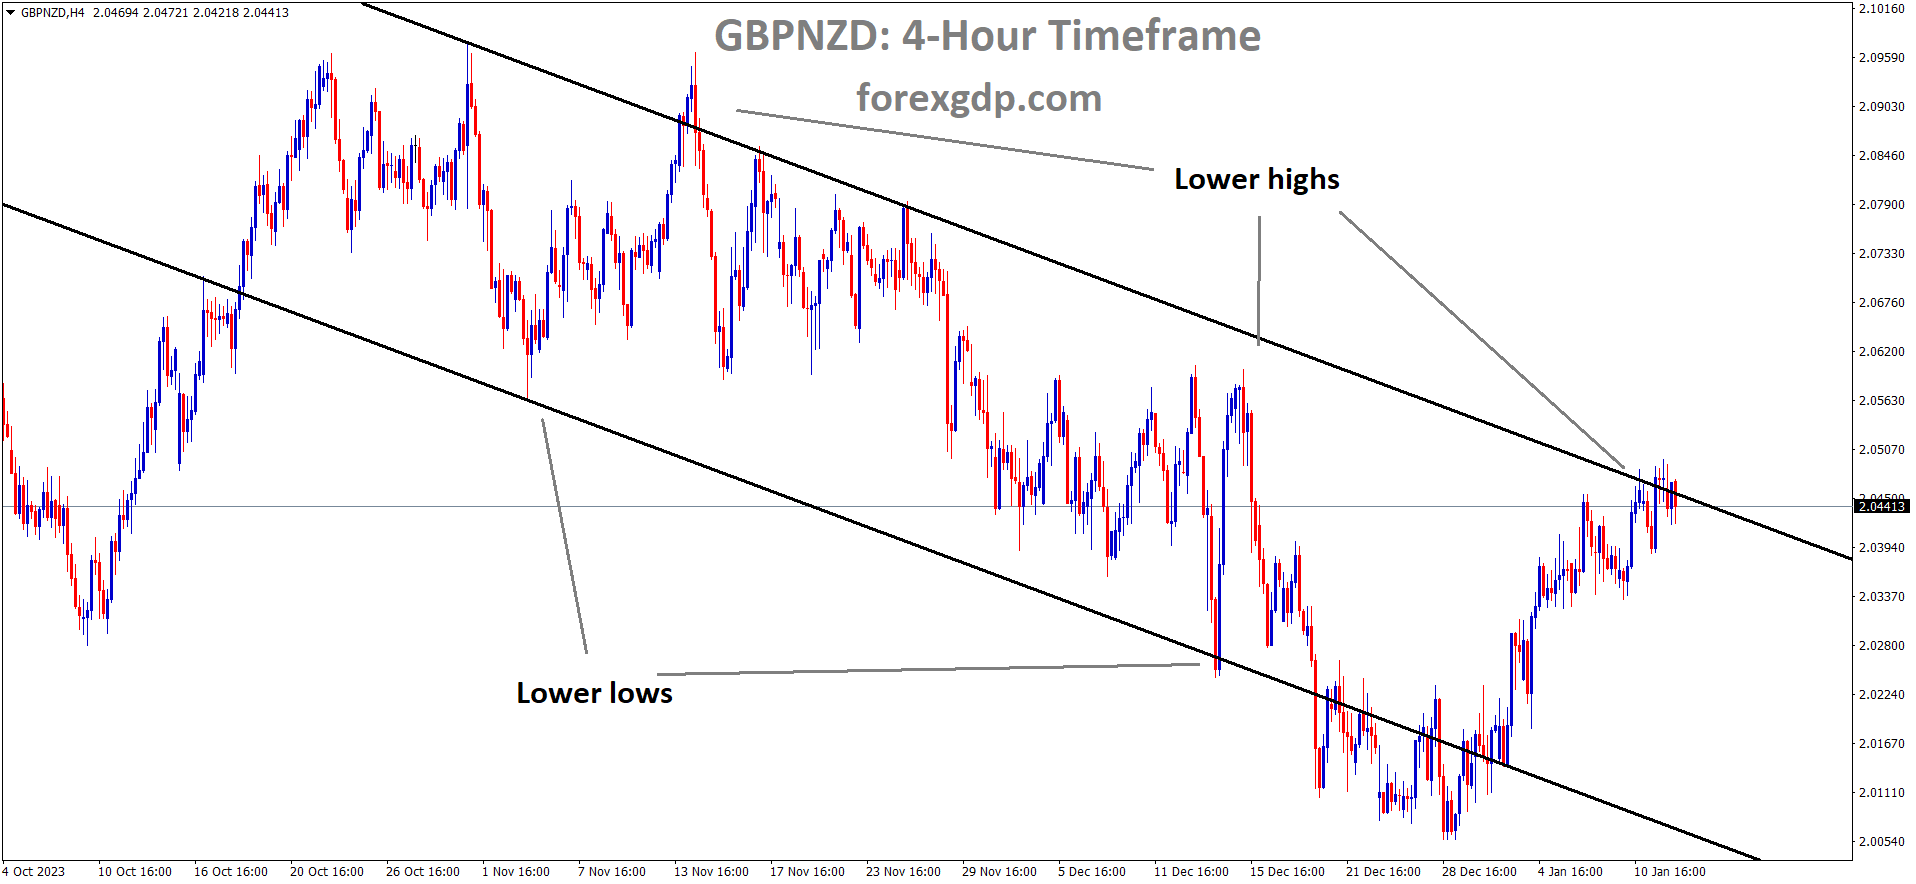 GBPNZD is moving in the Descending channel and the market has reached the lower high area of the channel